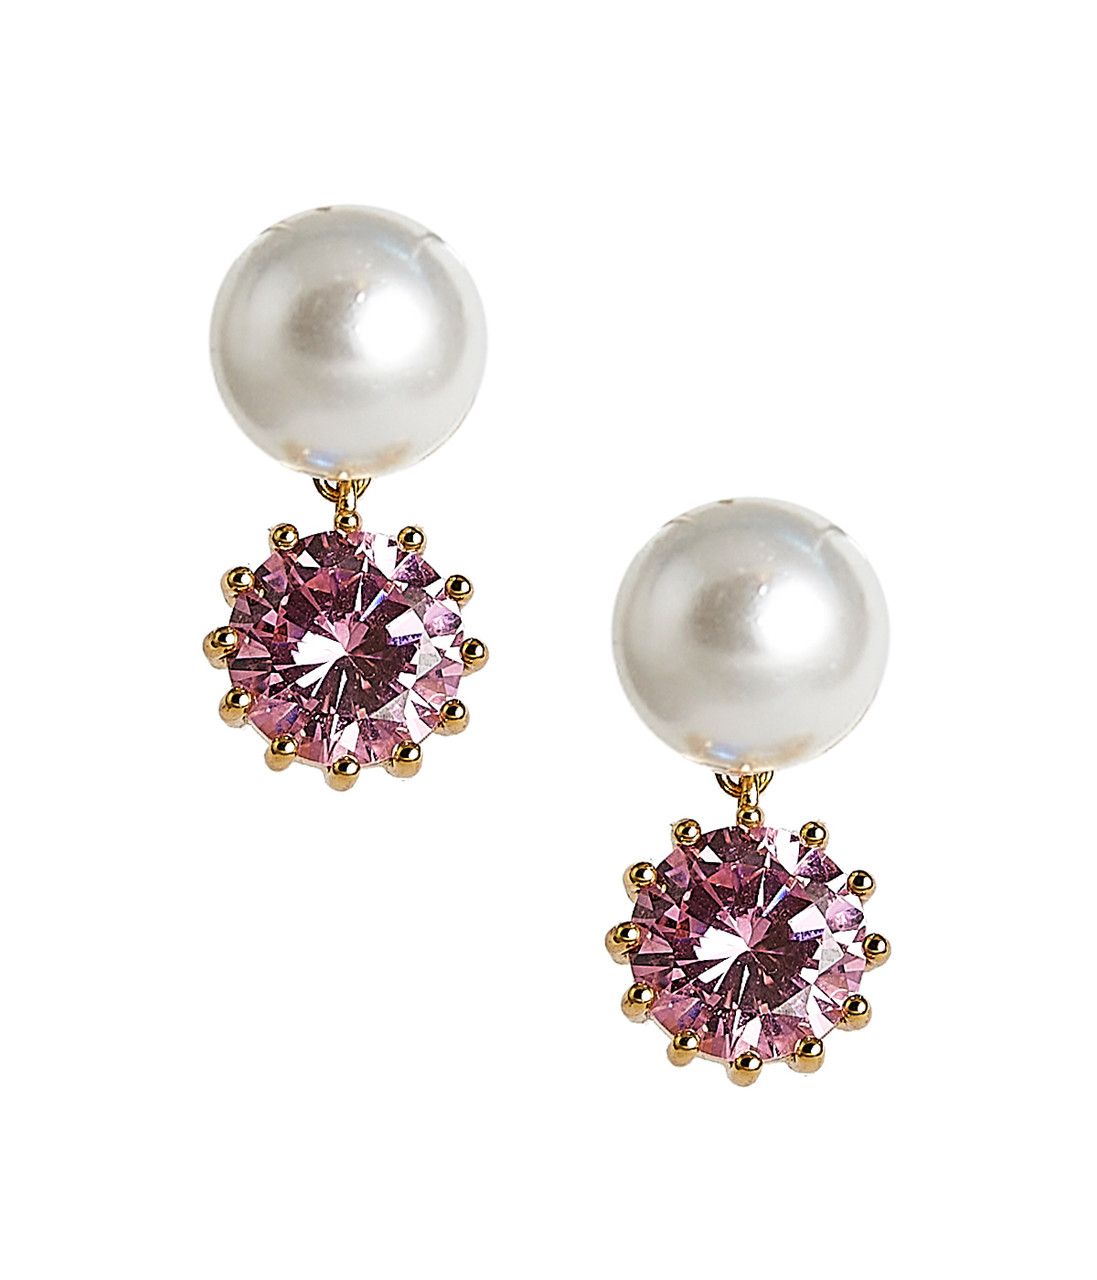 Crawley - Pearl and Rhinestone Earrings - Amy Littleson Collection | Lisi Lerch Inc